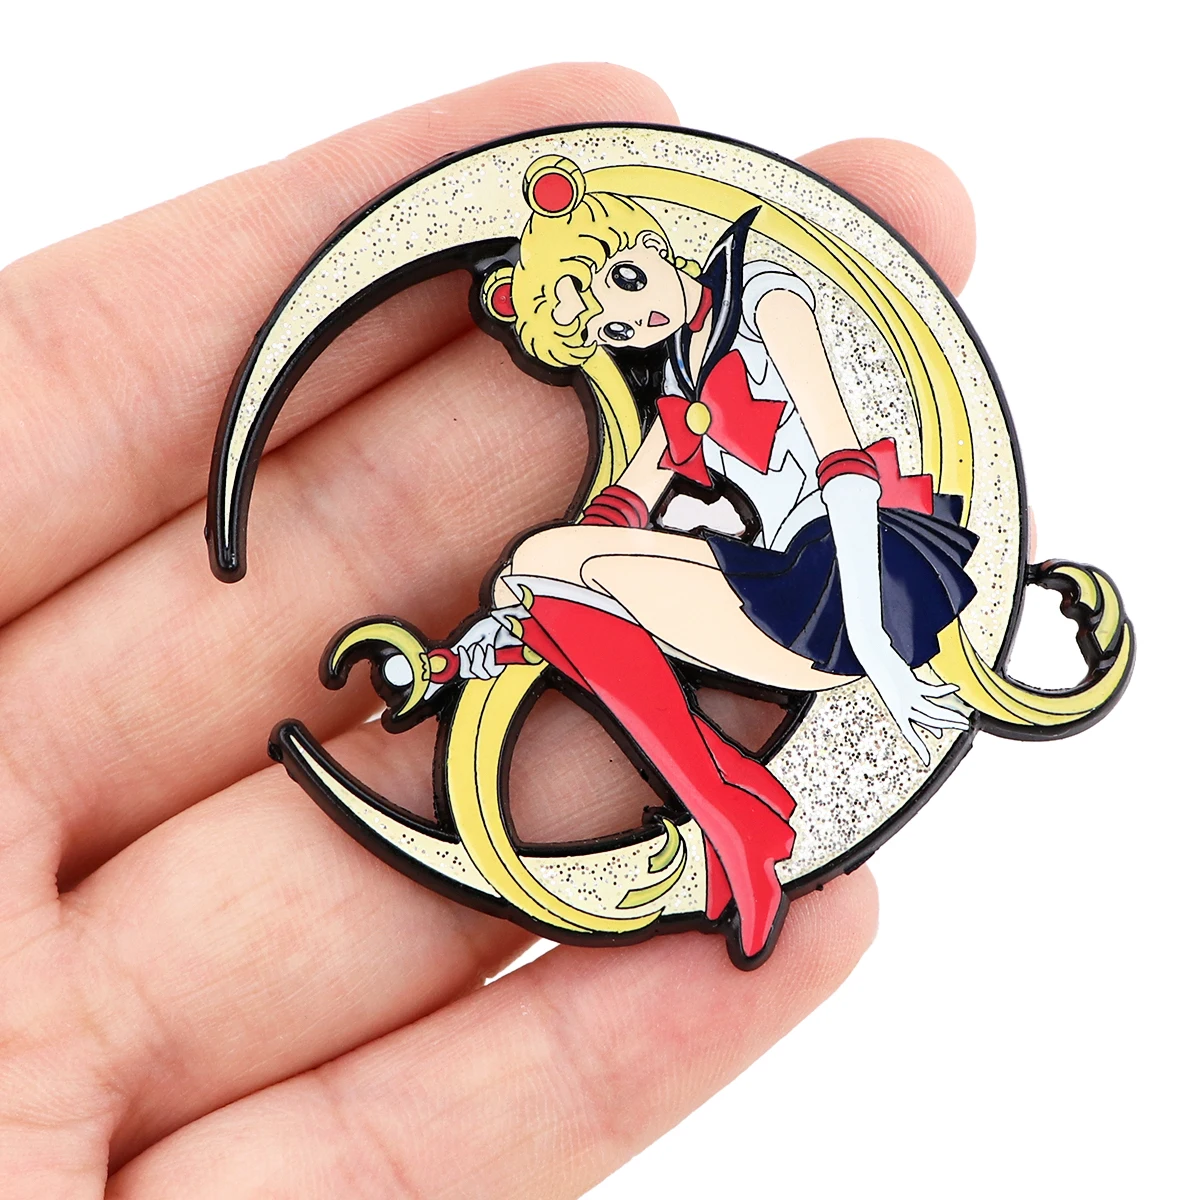 Anime Friends Enamel Pin Brooches for Women Manga Lapel Pins Badges on Backpack Cosplay Accessories Birthday Gift Toys